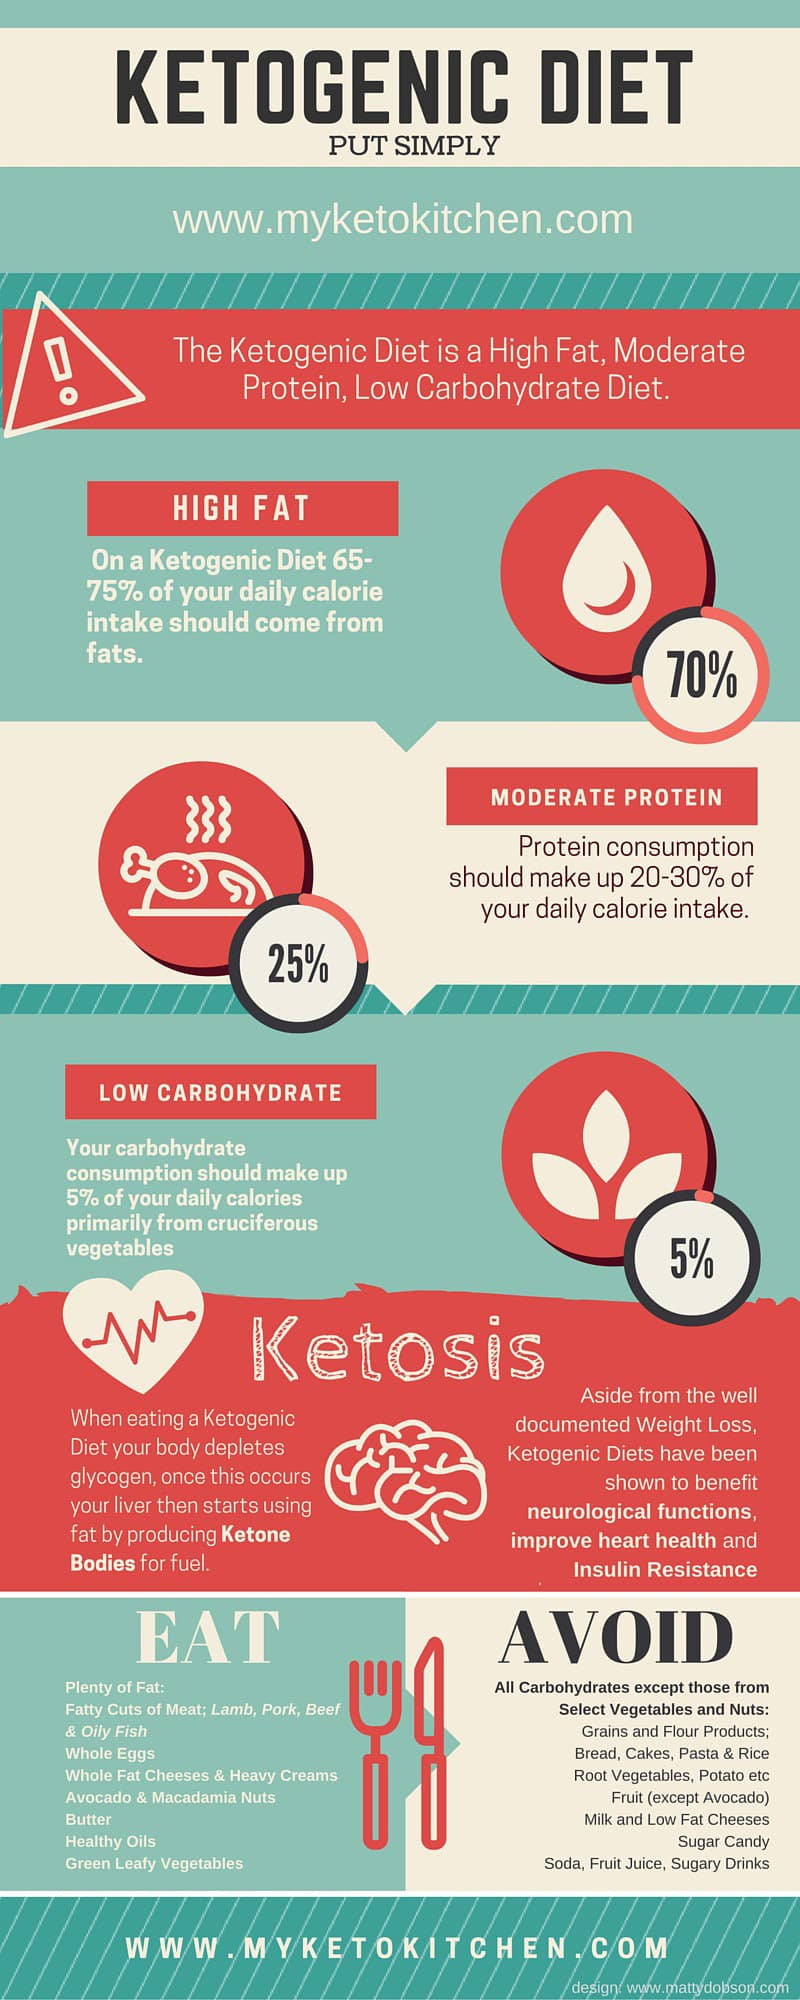 Keto Diet Is Bad
 How Much Protein A Keto Diet Is Too Much Bad for Ketosis